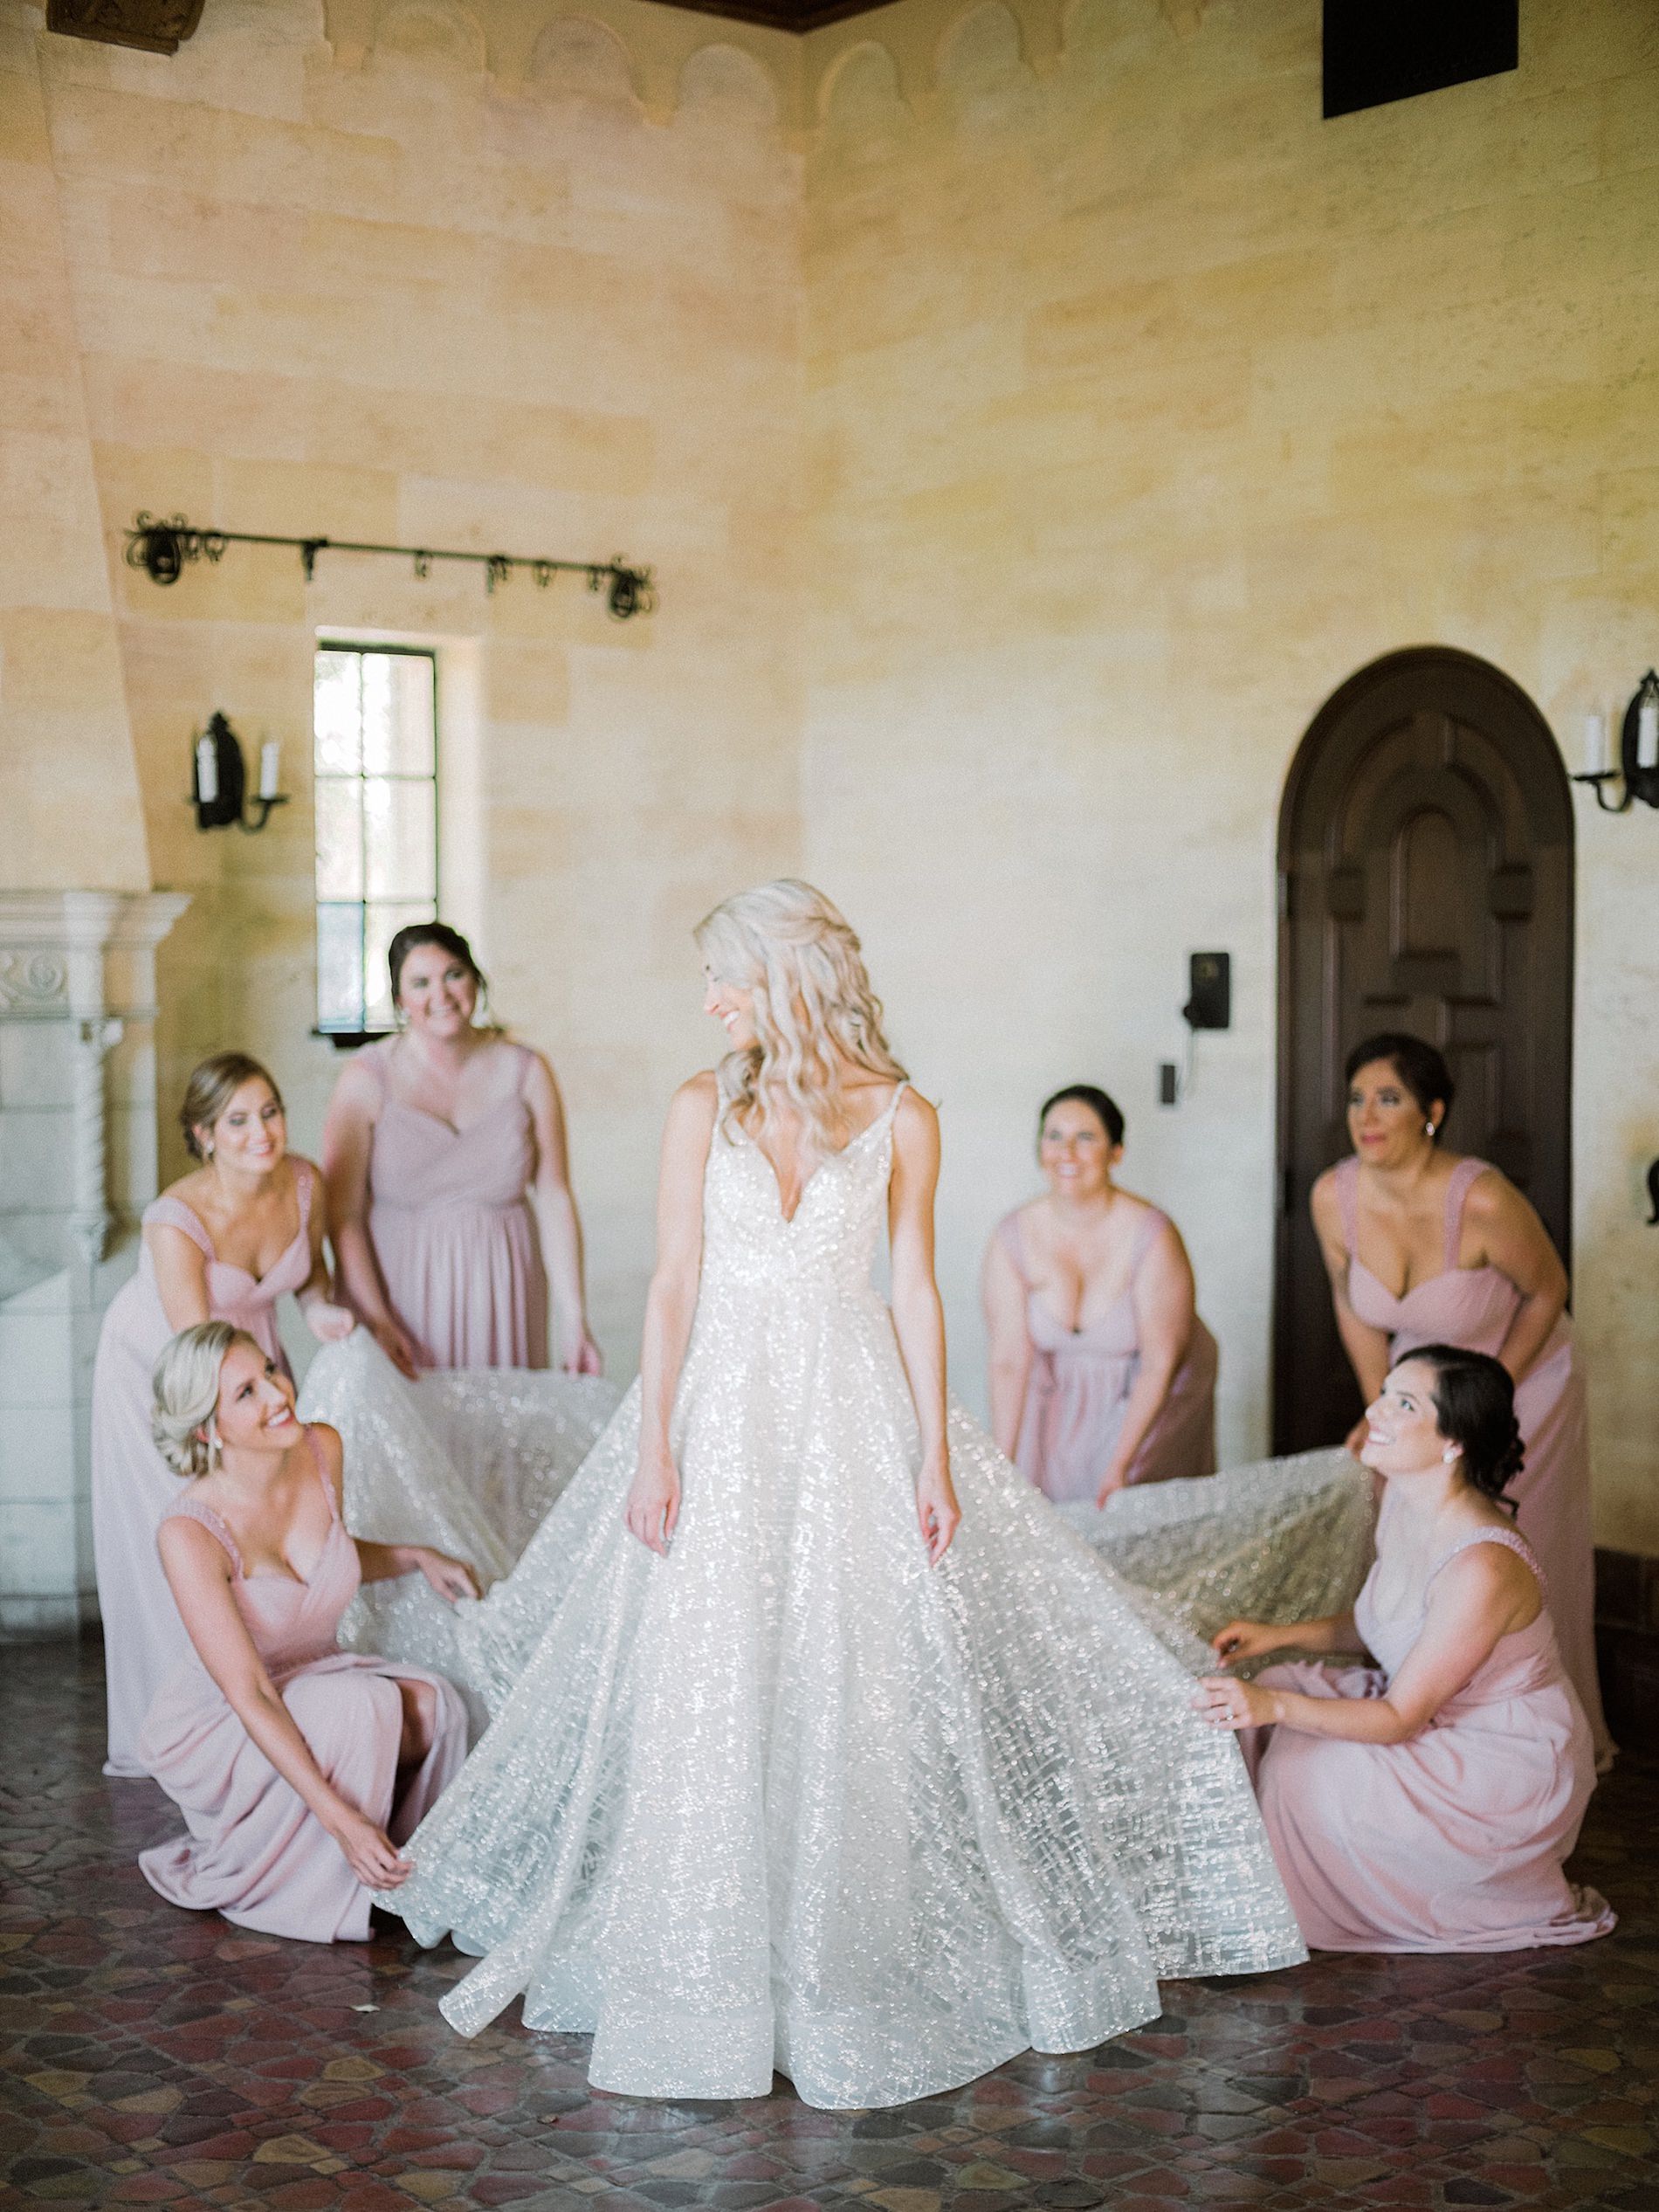 Romantic Bride in Lazaro V-Neck Ballgown Specialty Fabric Wedding Dress with Bridesmaids in Blush Pink Dresses Portrait